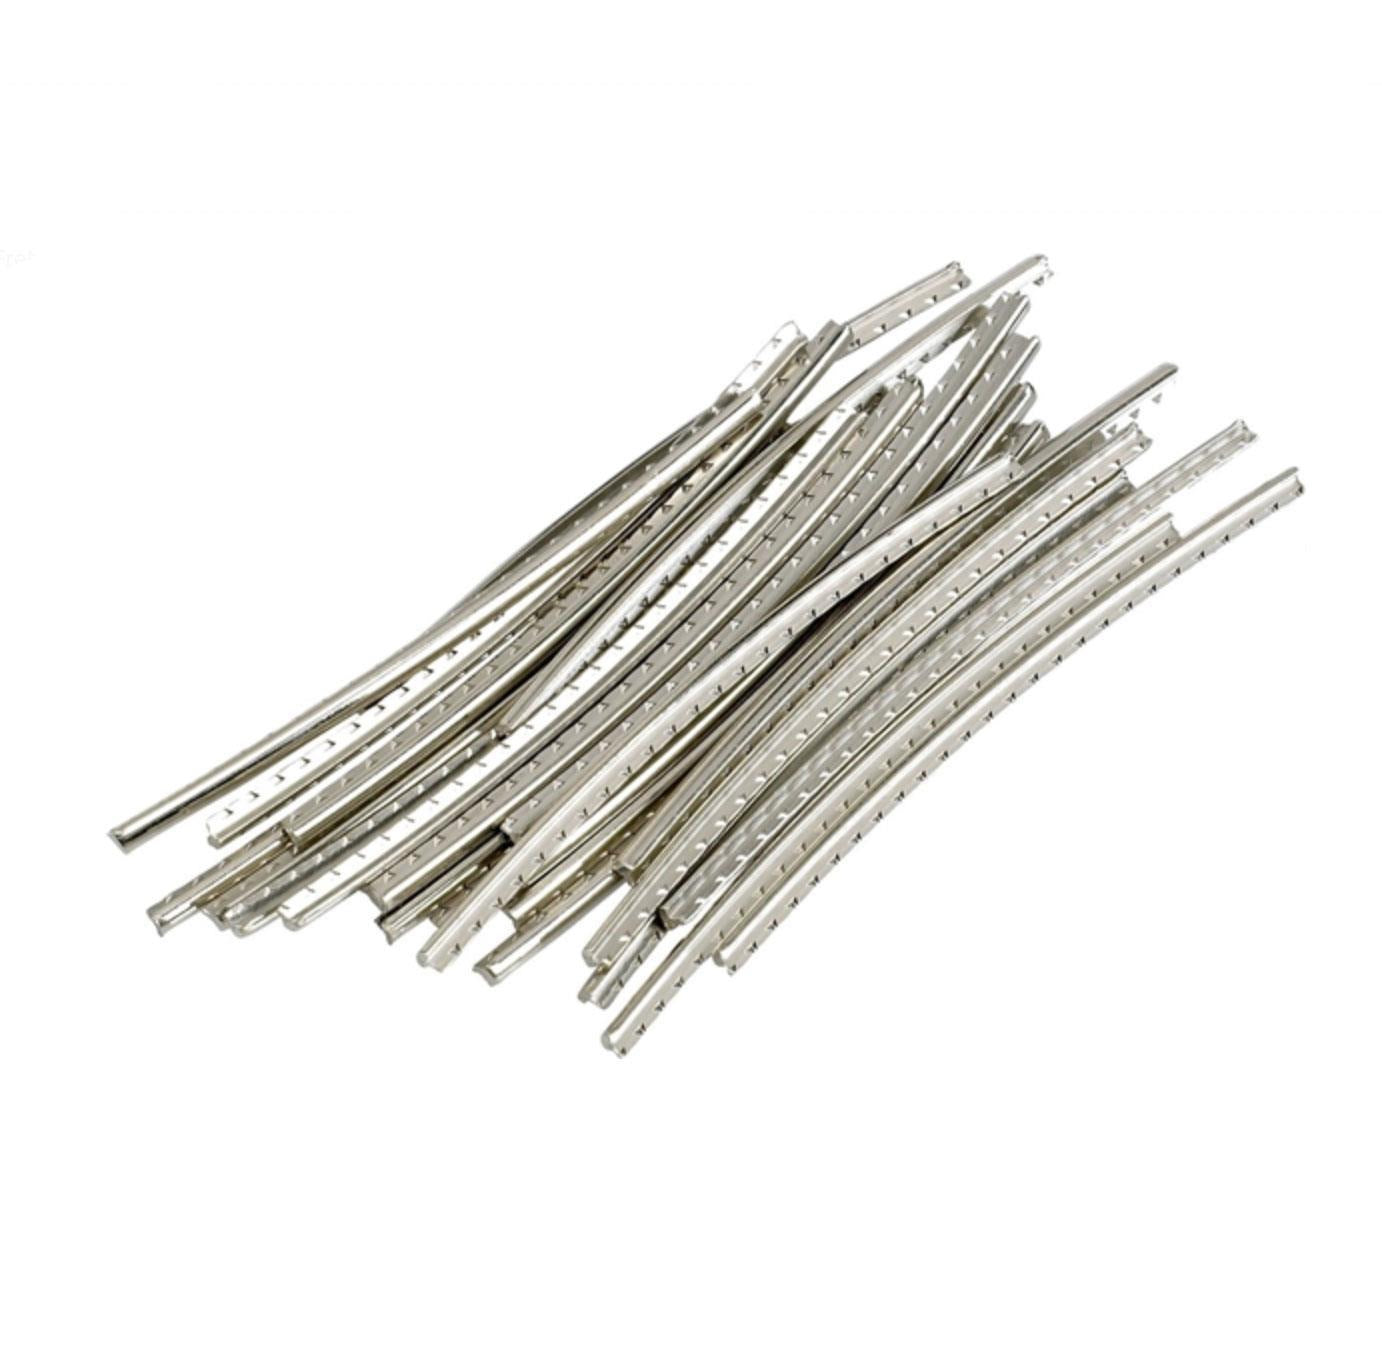 Fender Medium Jumbo Fret Wire - 24 Pieces for Stratocaster/Telecaster